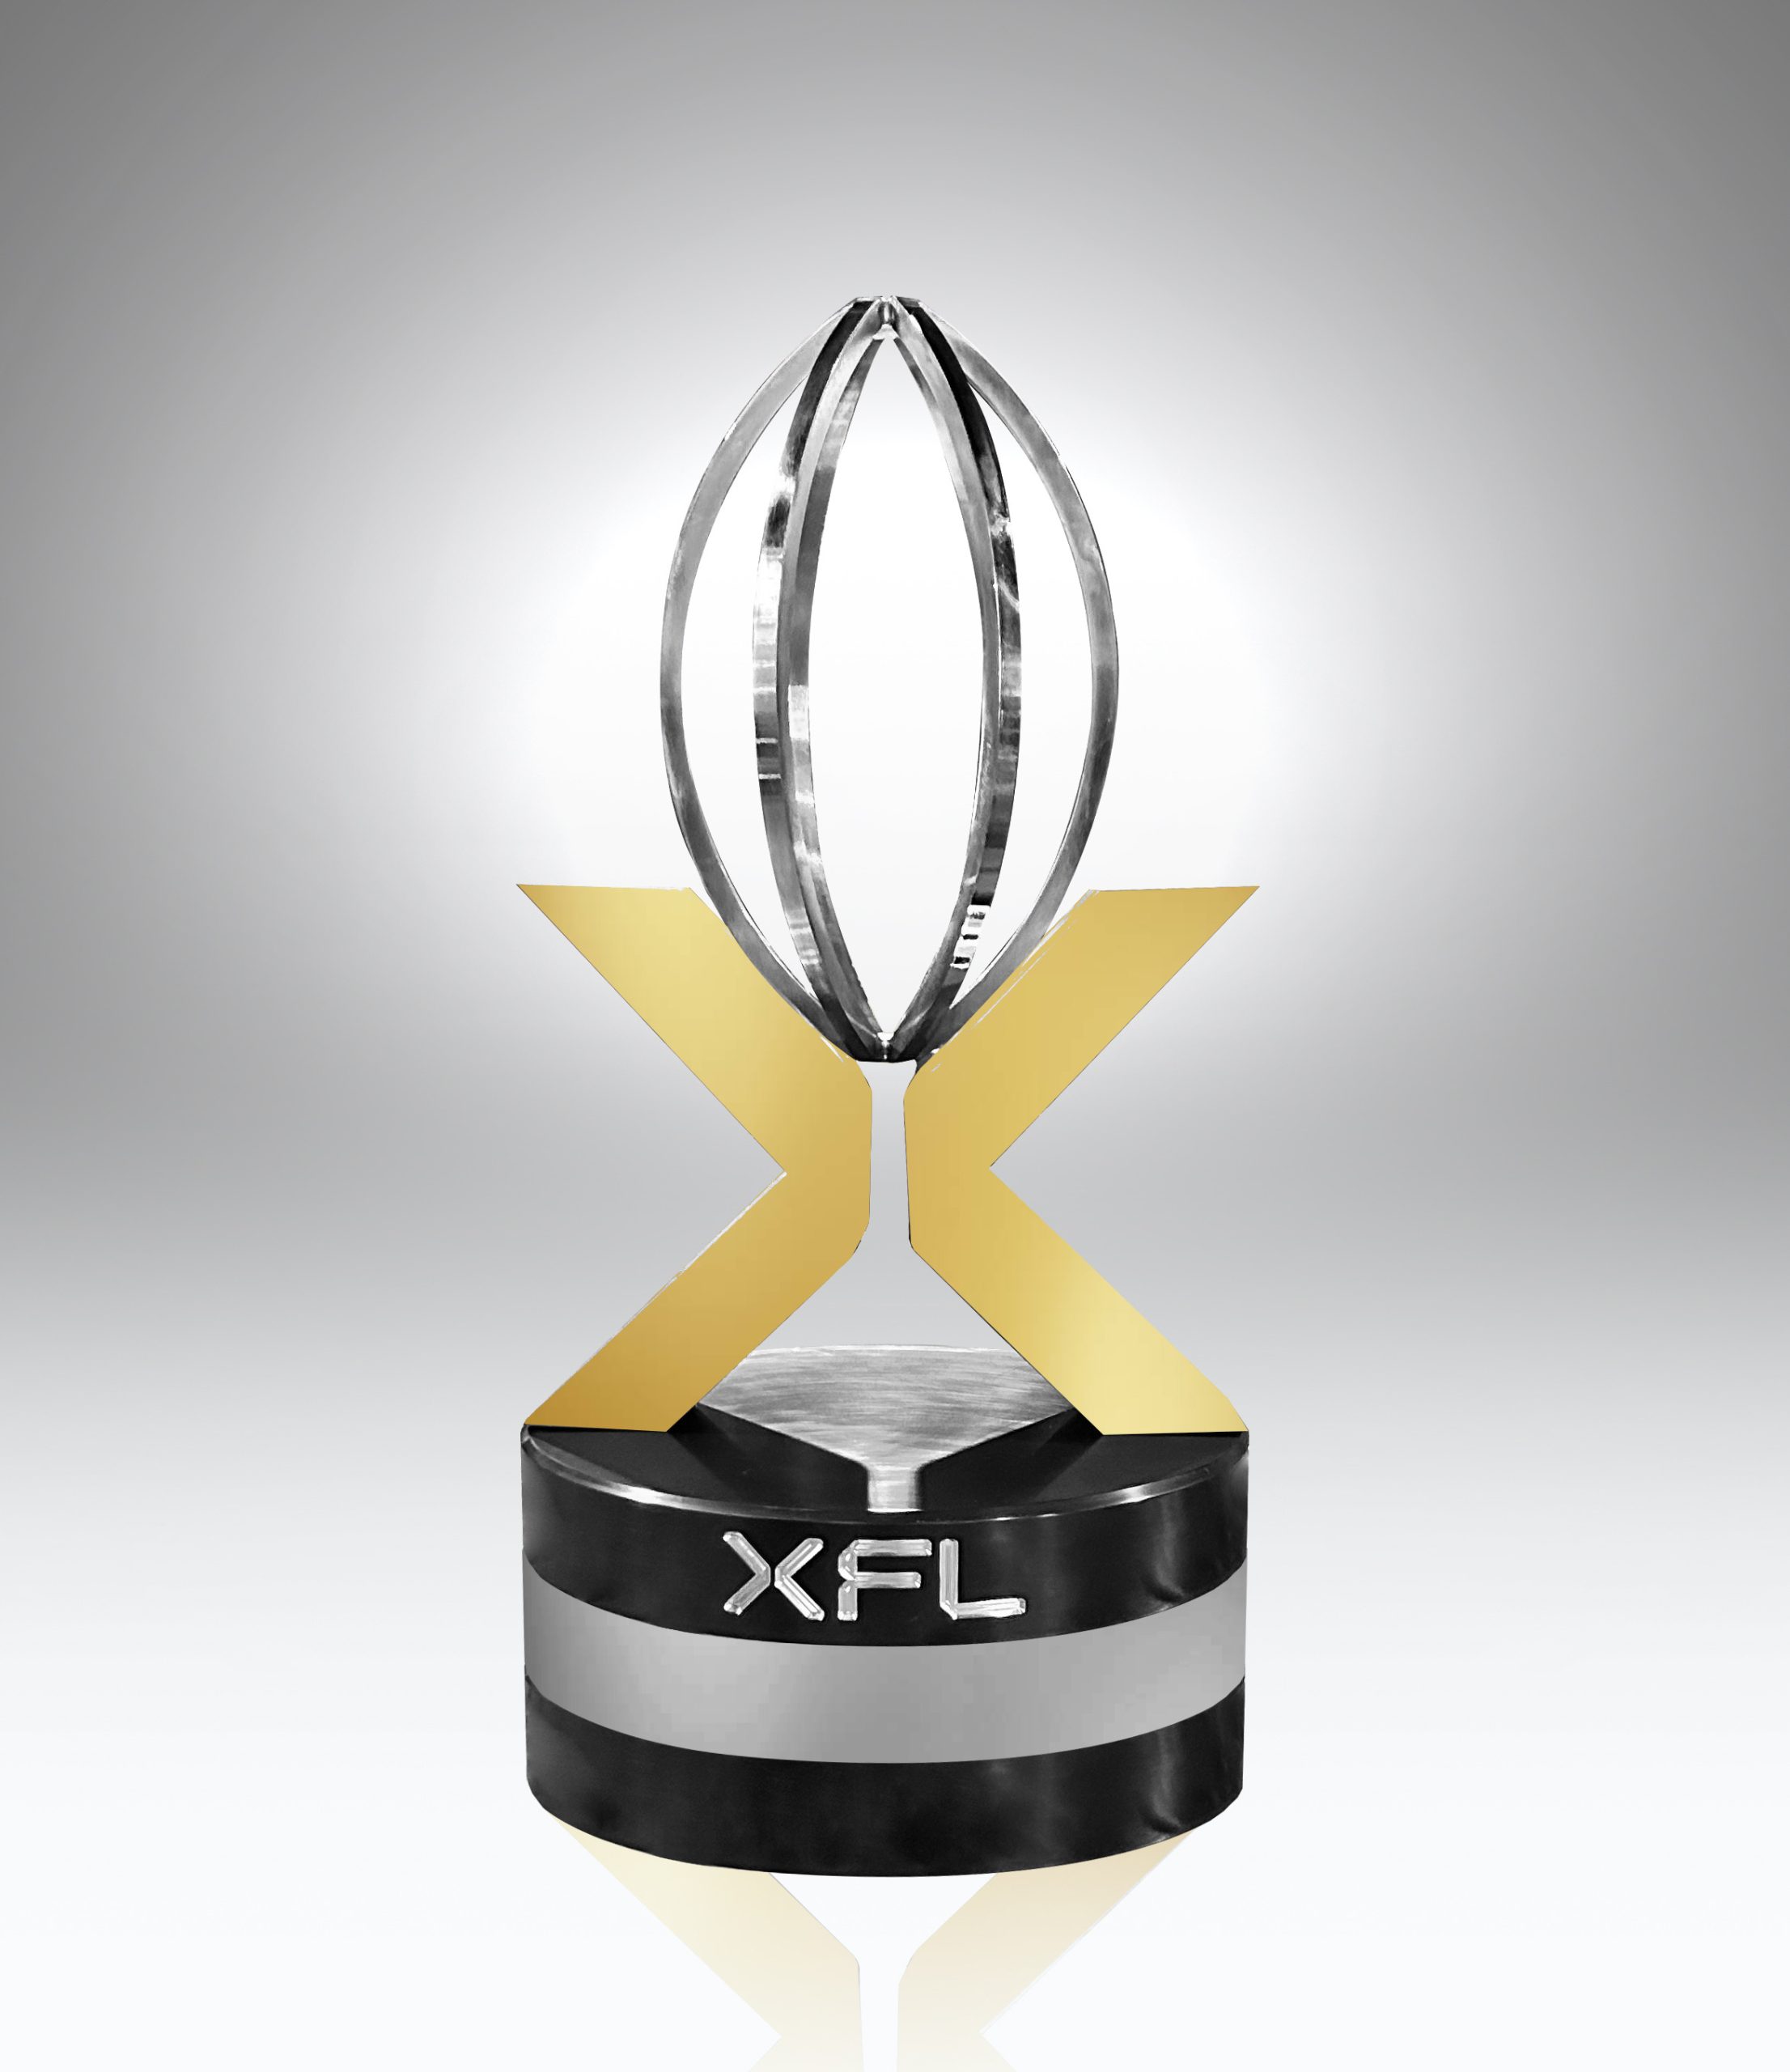 XFL Unveils Championship Trophy UFL News and Discussion